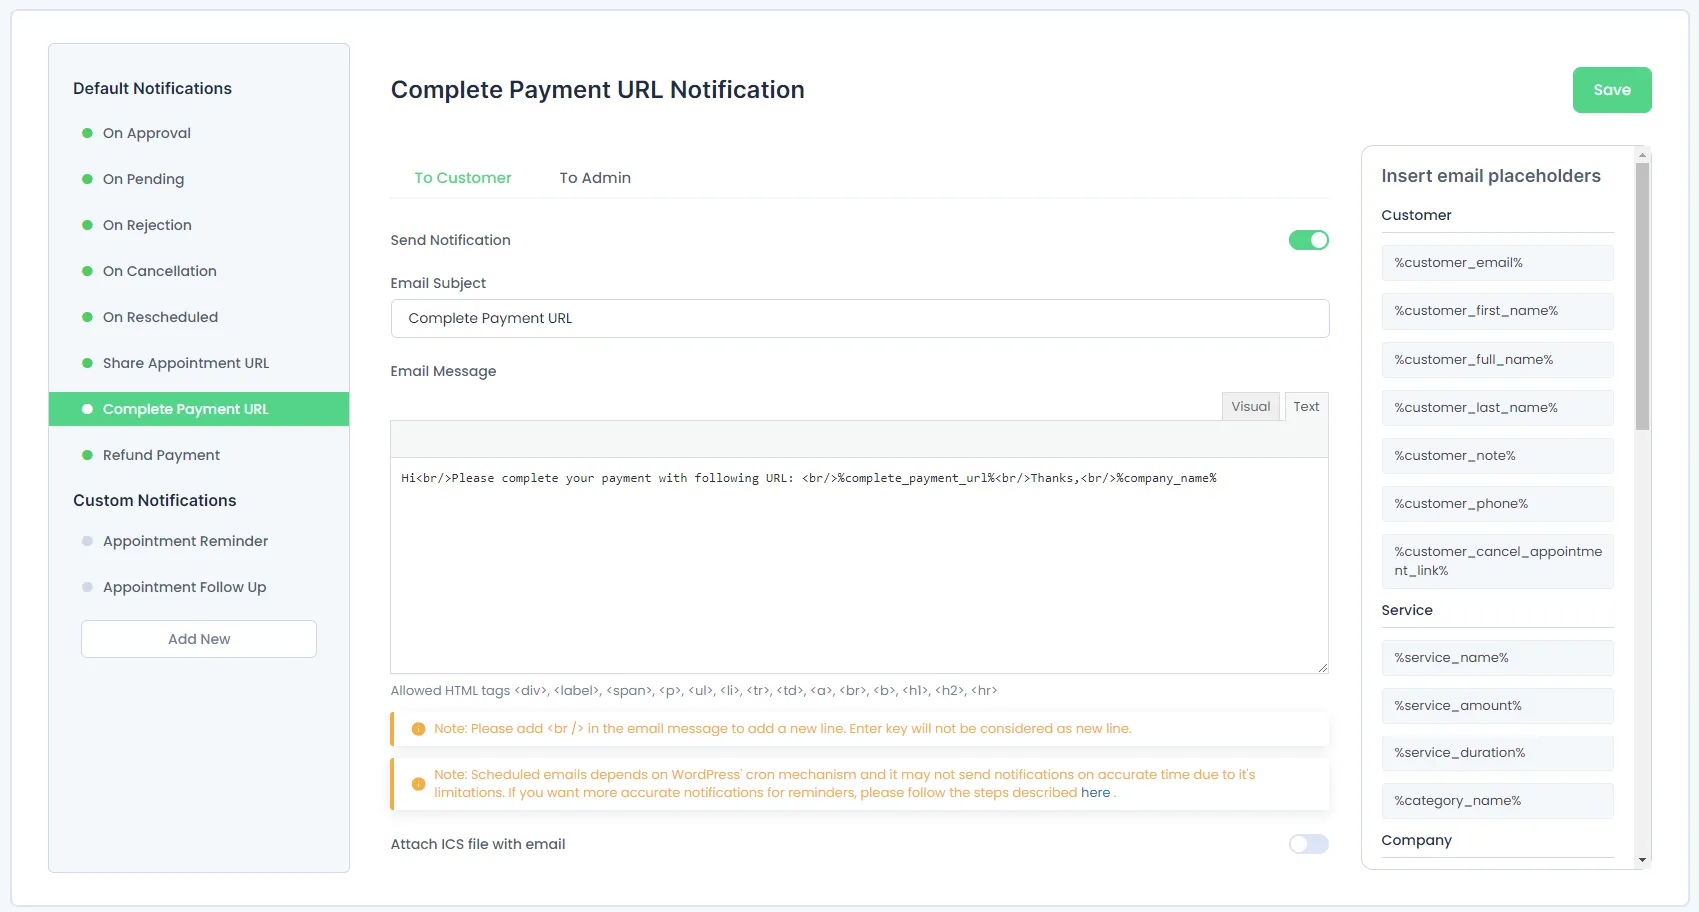 Complete Payment URL